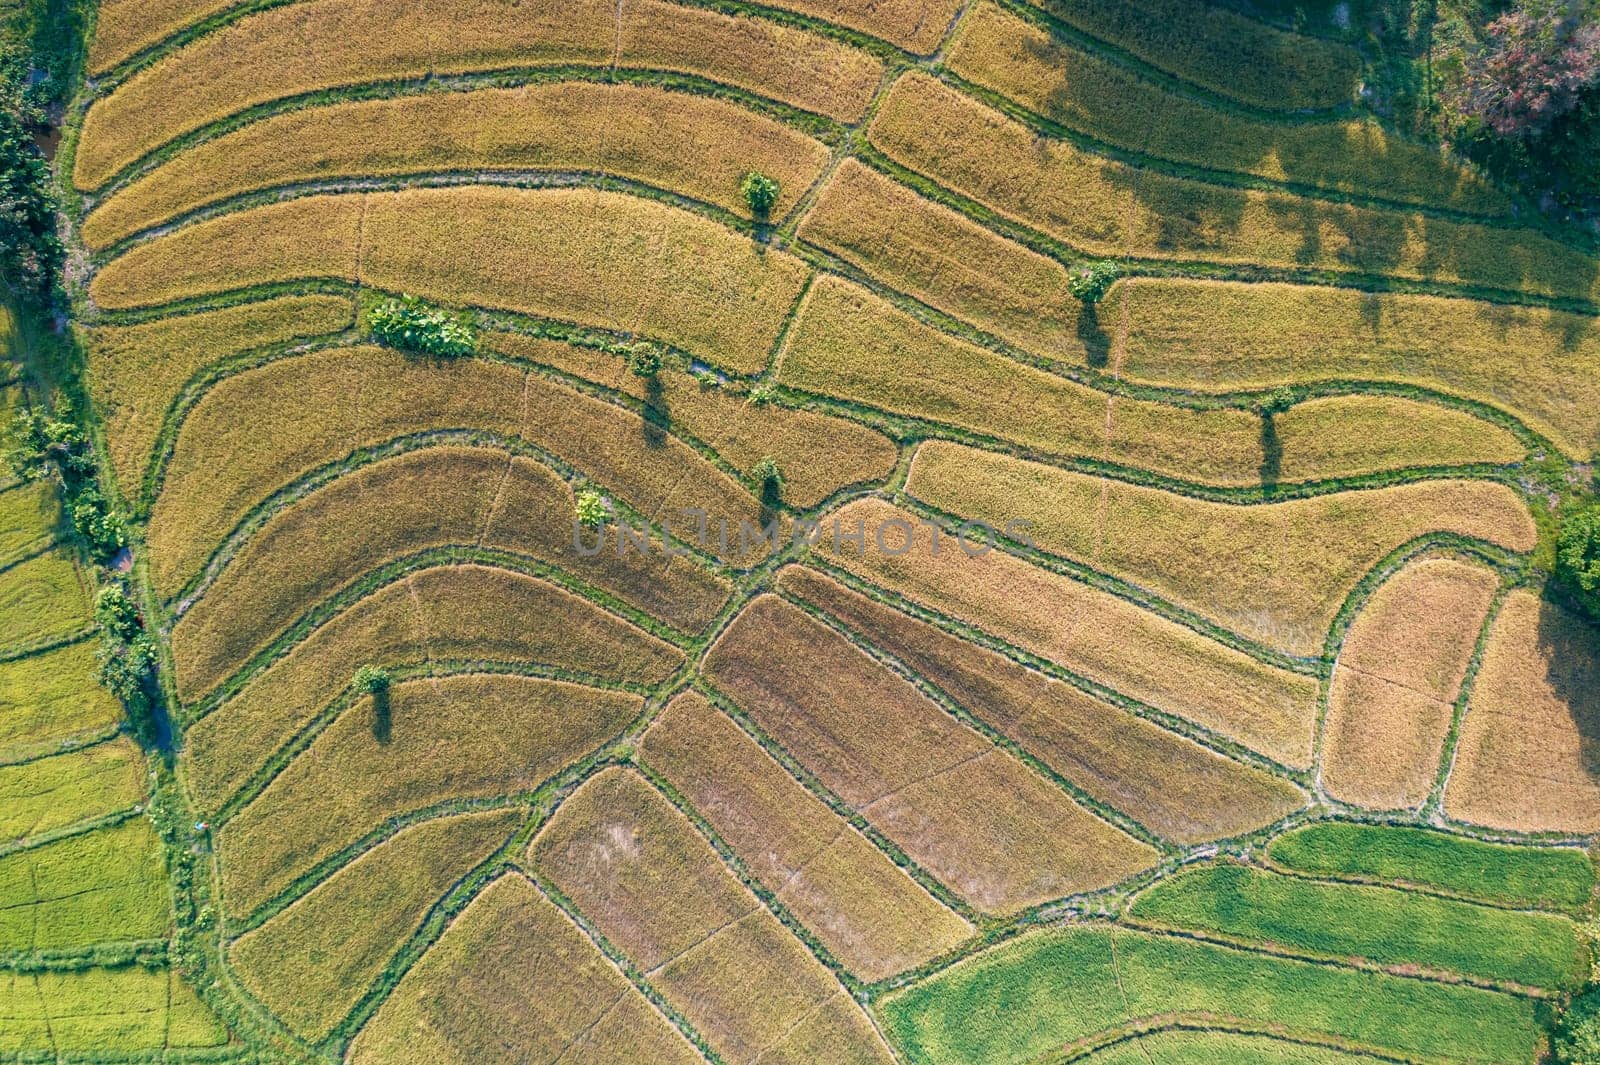 A beautiful aerial perspective showing the intricate pattern of rice terraces in a rural area of Asia under the soft late afternoon light.